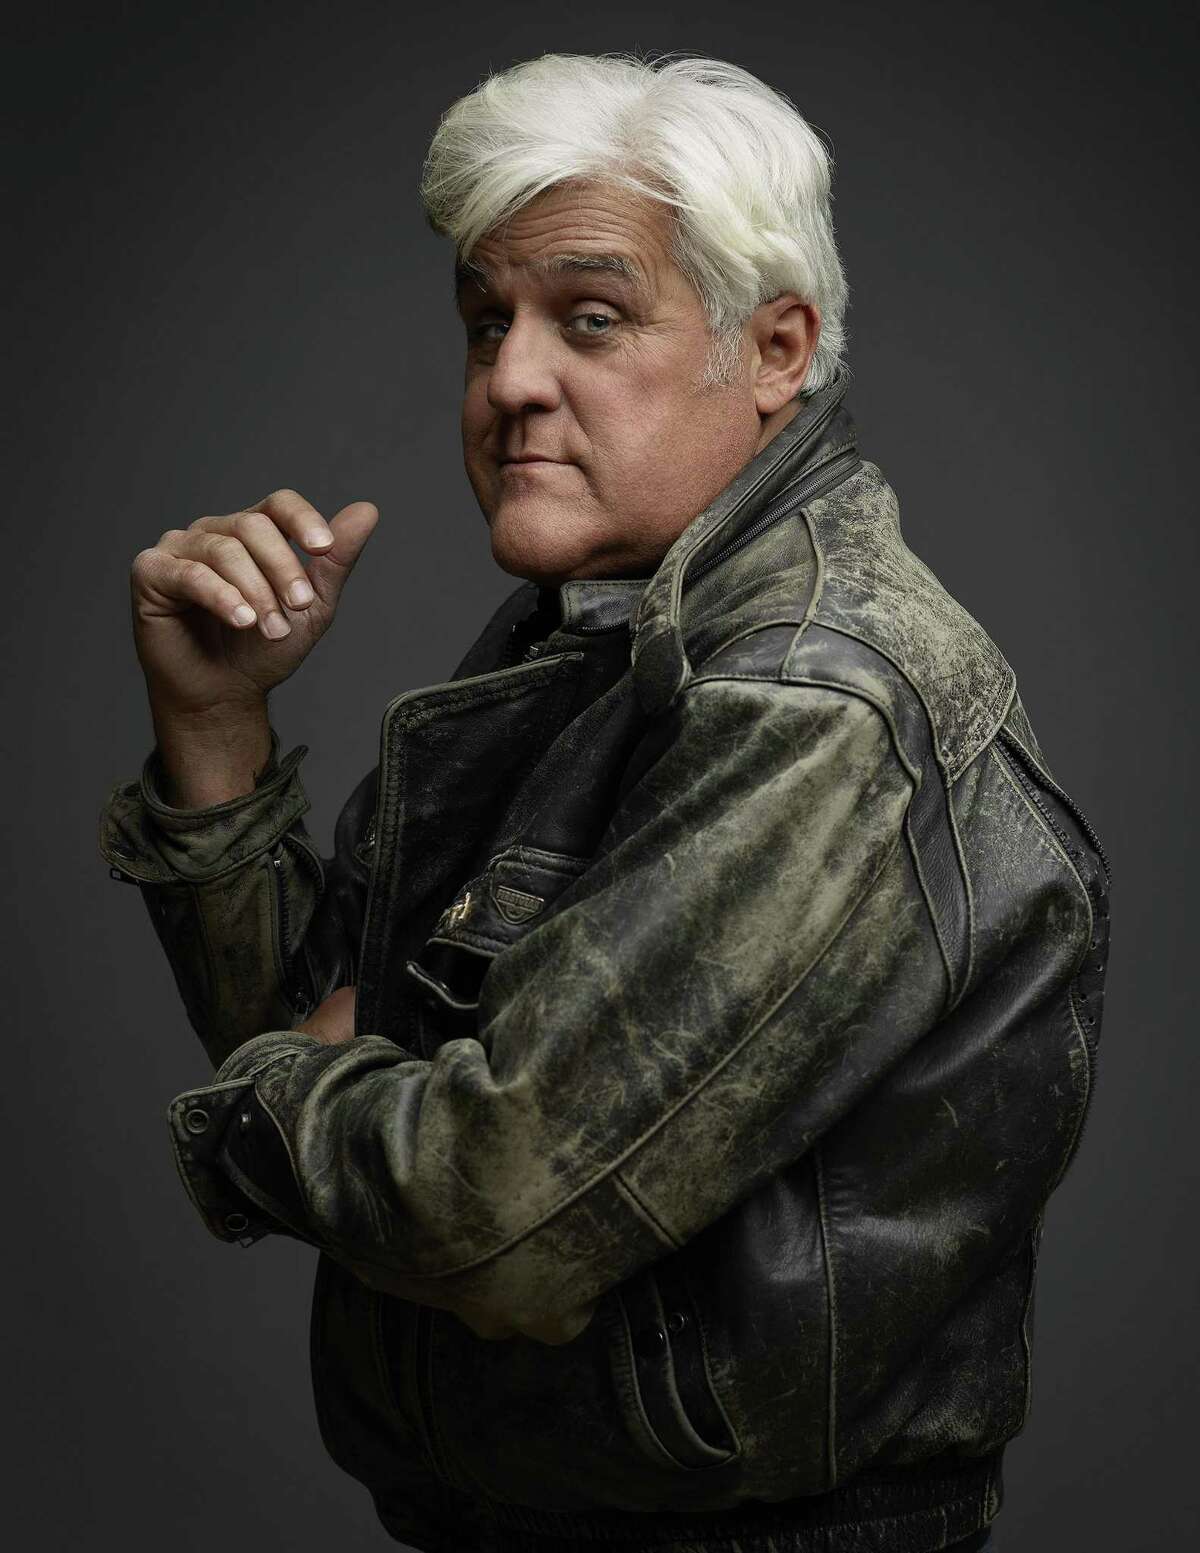 Jay Leno, former host of “The Tonight Show” and currently hosting “Jay Leno’s Garage,” is speaking publicly about having high cholesterol and what he’s doing to stay healthy.